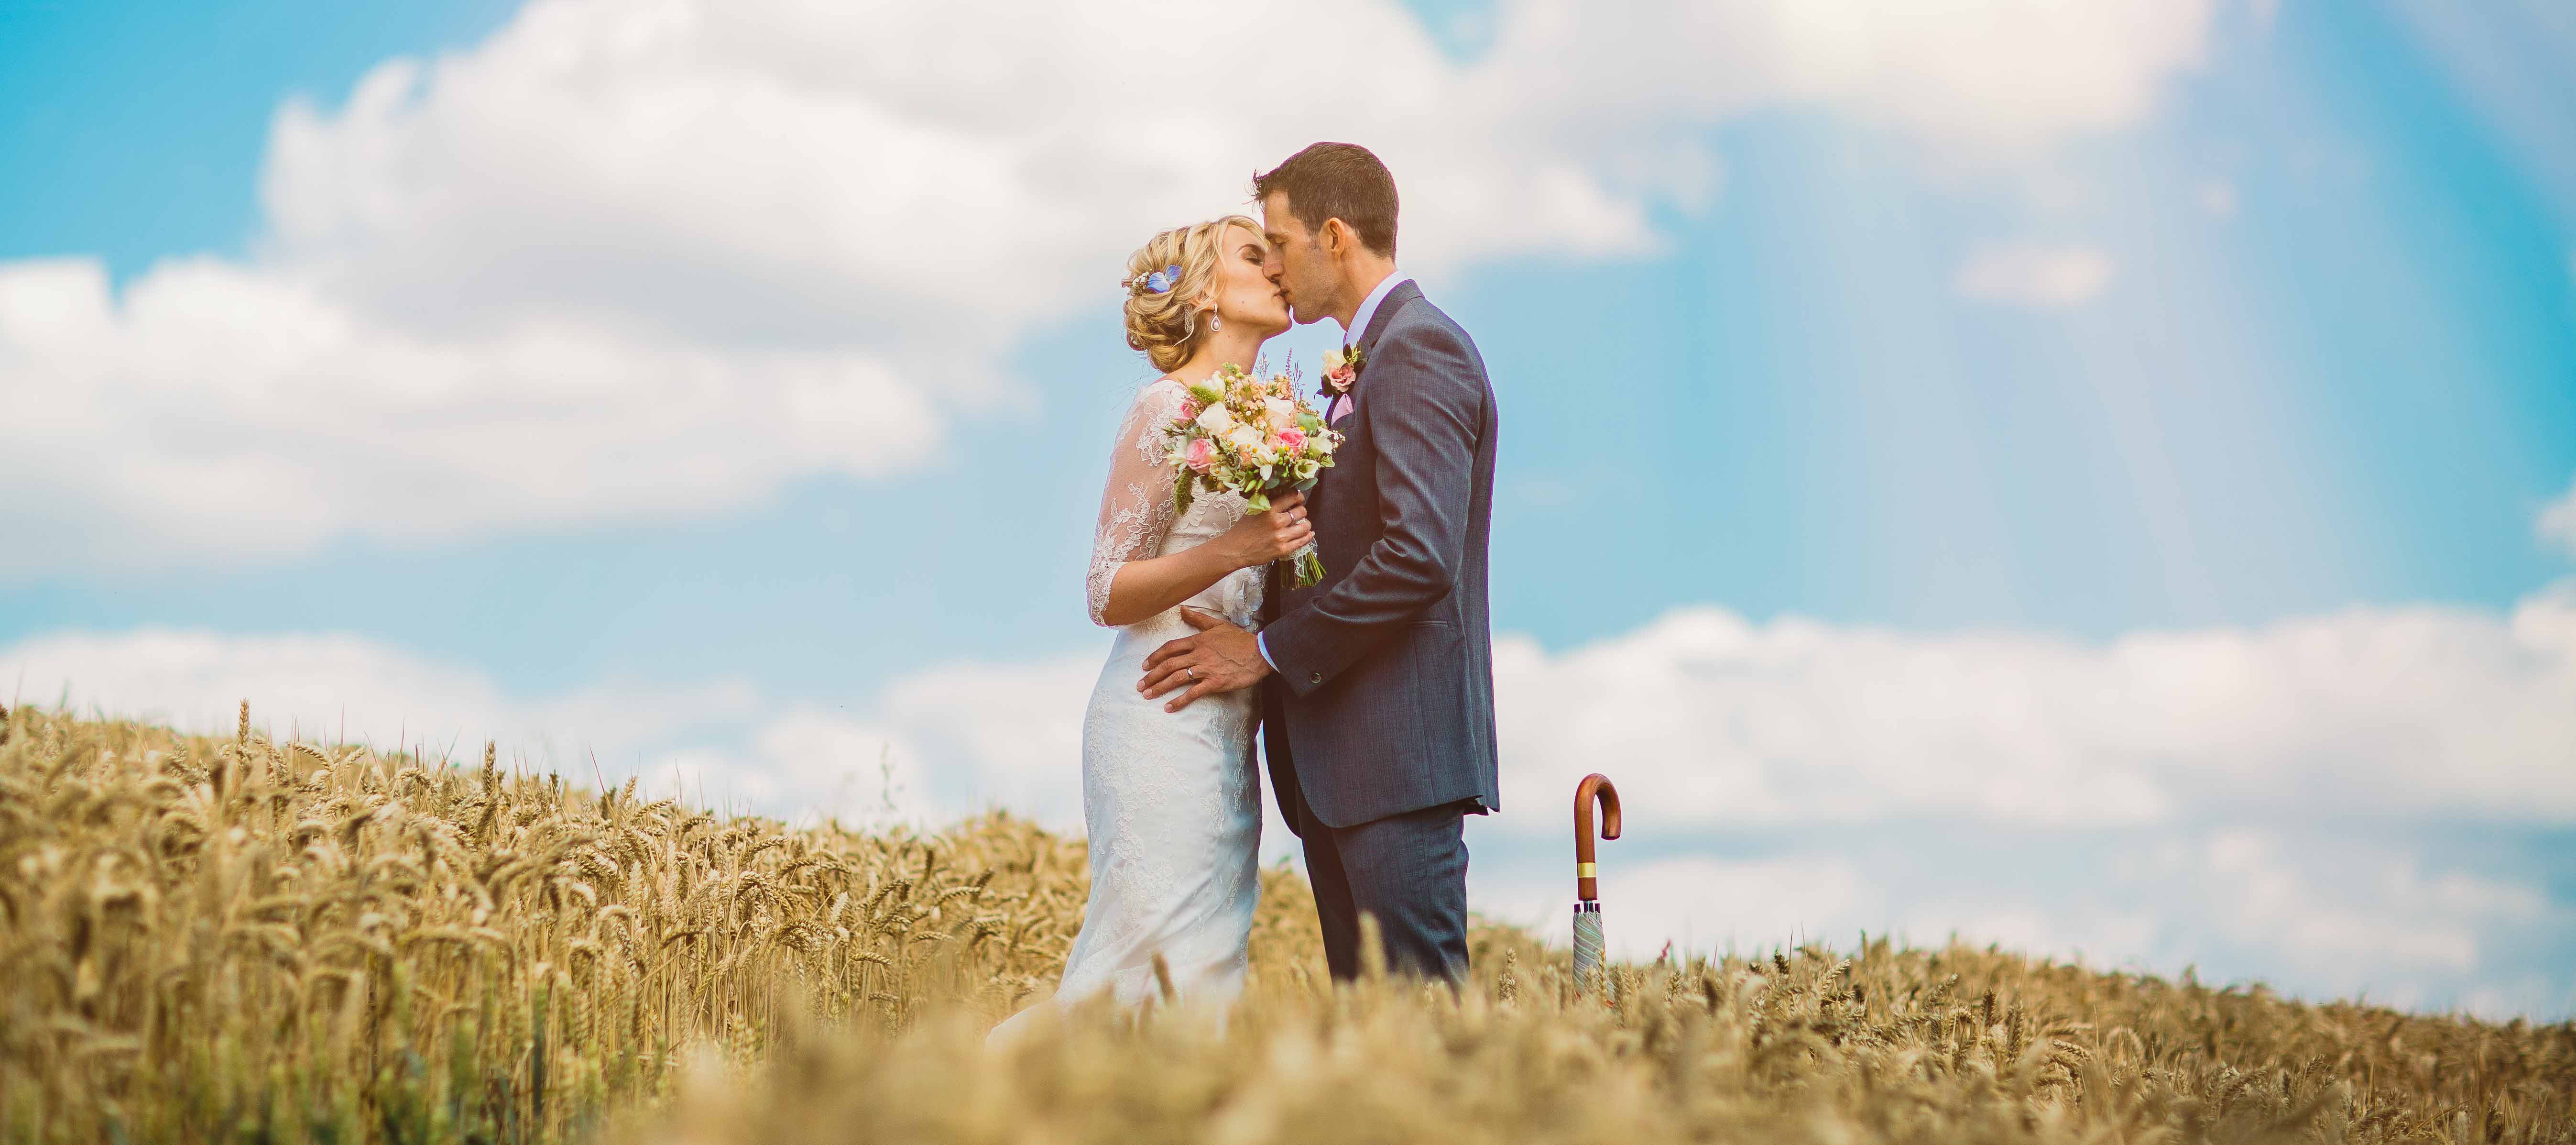 Tom is a creative Somerset wedding and commercial photographer based in Bath covering the UK and beyond.